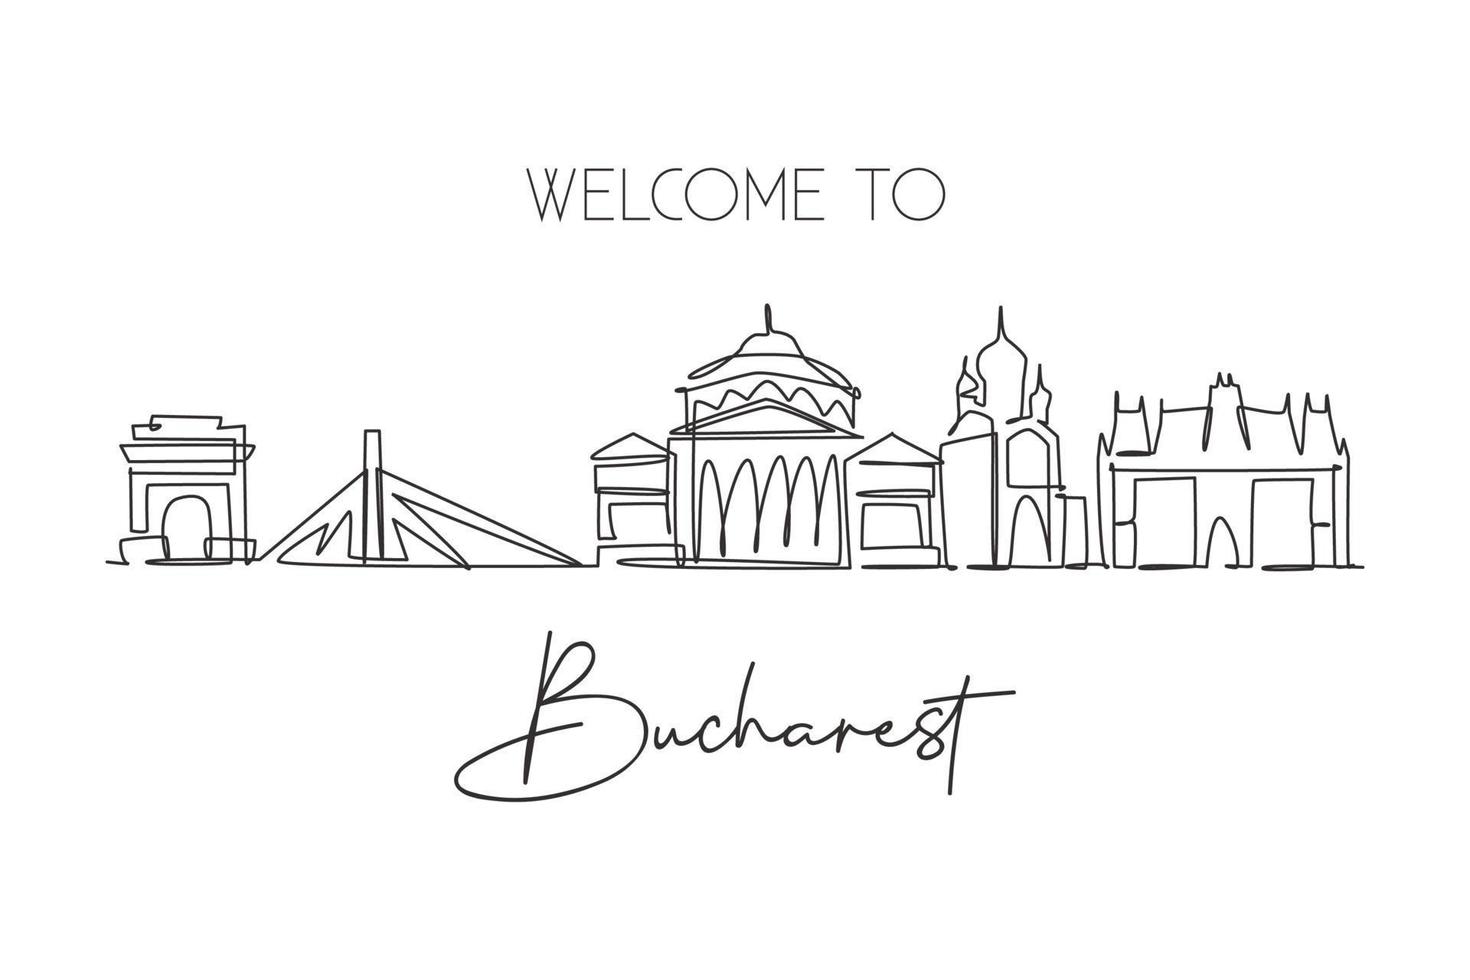 Single continuous line drawing of Bucharest city skyline, Romania. Famous city scraper landscape. World travel home art wall decor poster print concept. Modern one line draw design vector illustration